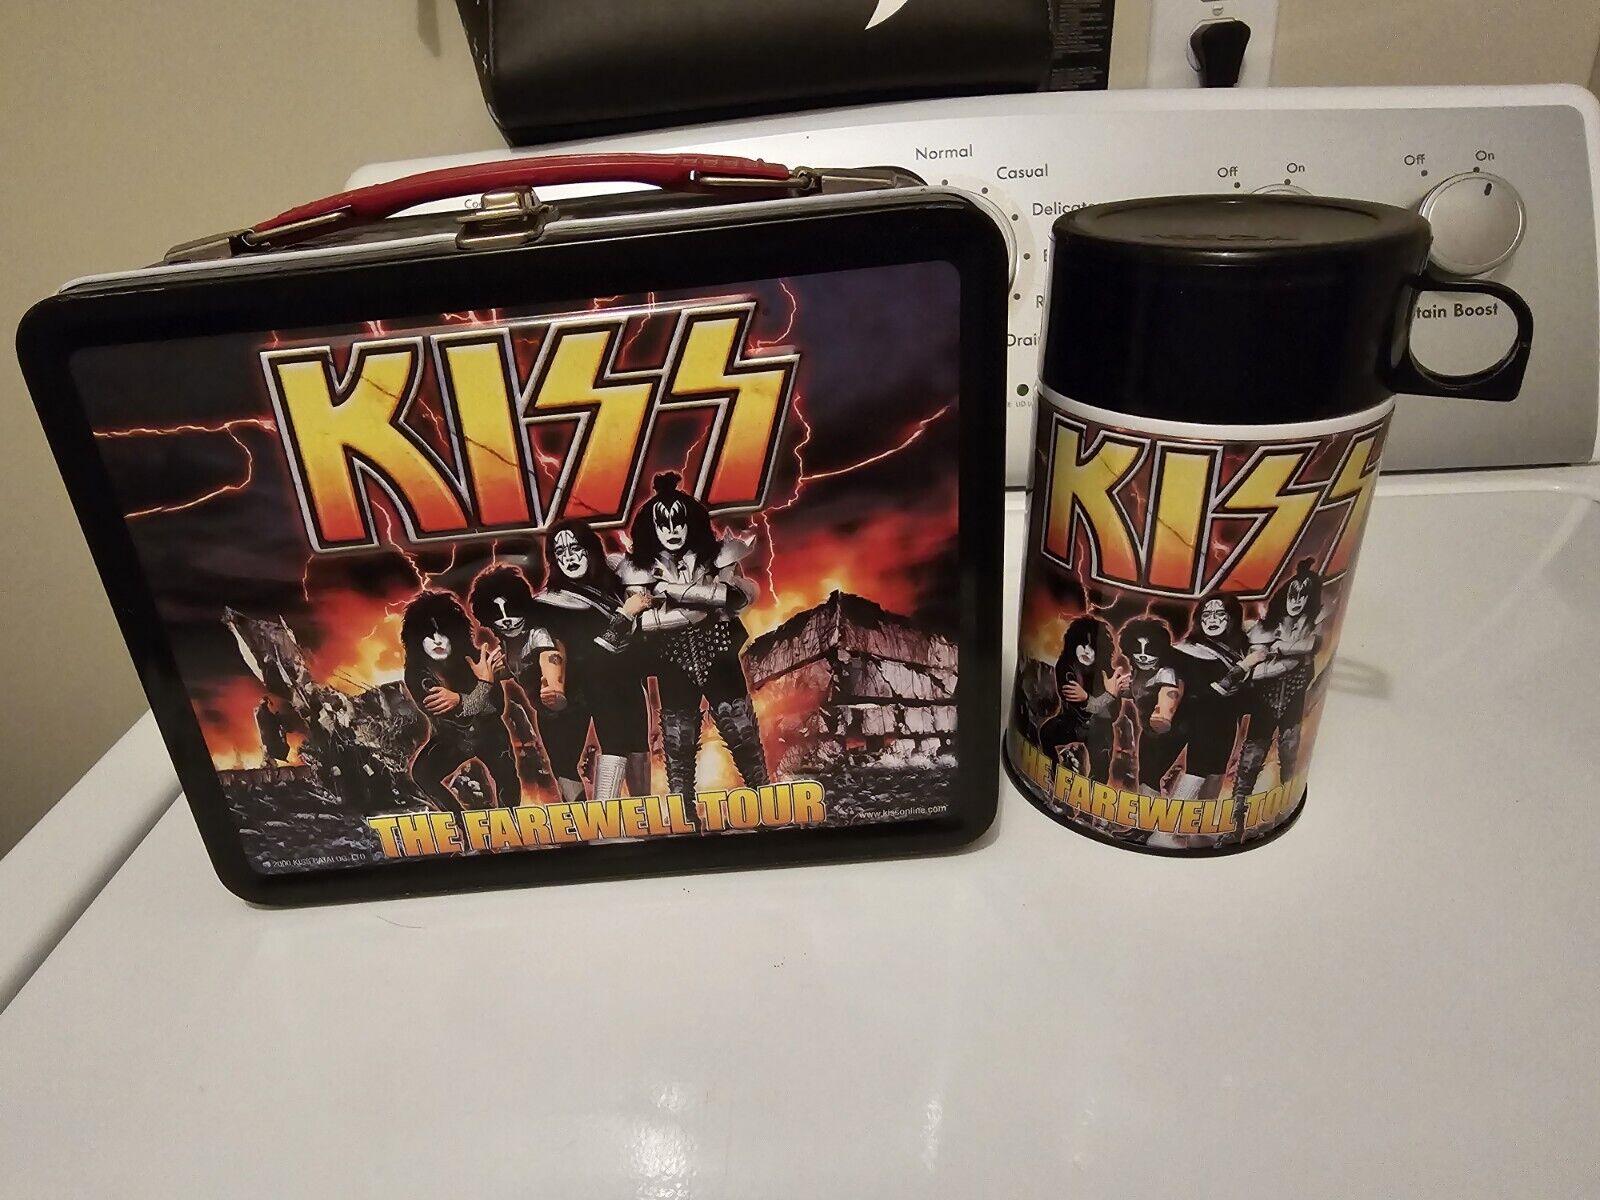 KISS Retro Metal Tin Lunchbox The Farewell Tour With Thermos Rare Rock n Roll